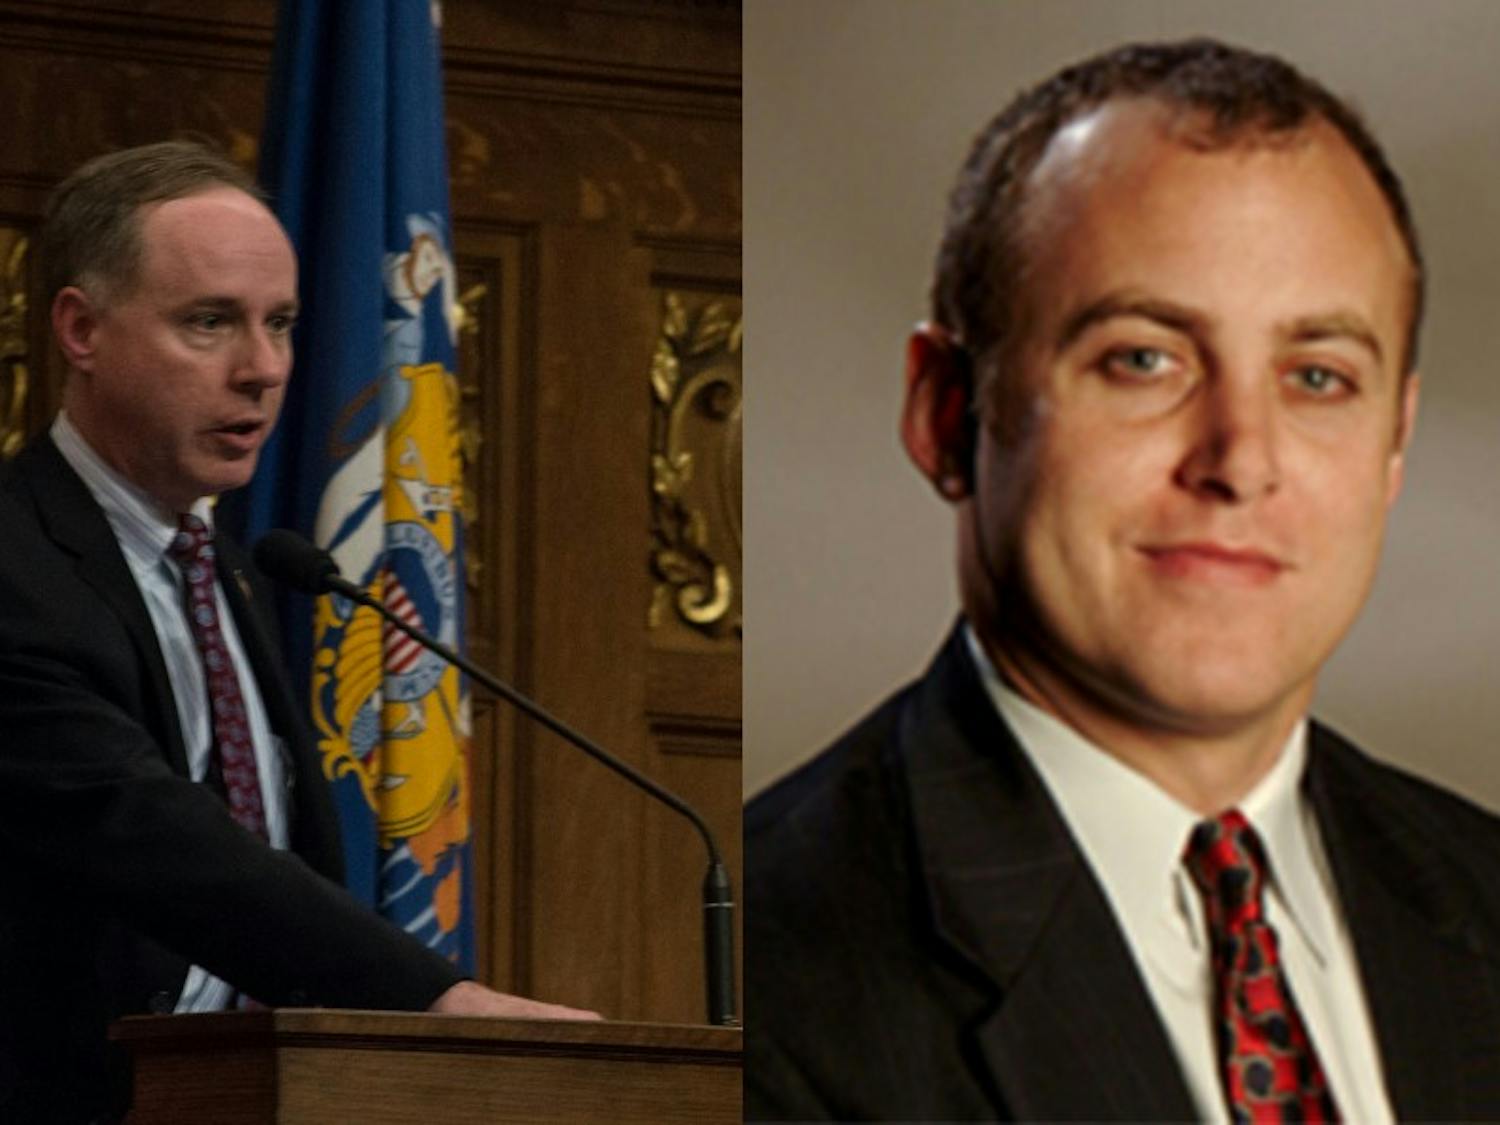 State Assembly Speaker Robin Vos, R-Rochester, and state Assembly Minority Leader Gordon Hintz, D-Oshkosh, both defended the decision to withhold records of sexual harassment issued against legislators and their staff Tuesday in an effort to protect victim privacy.